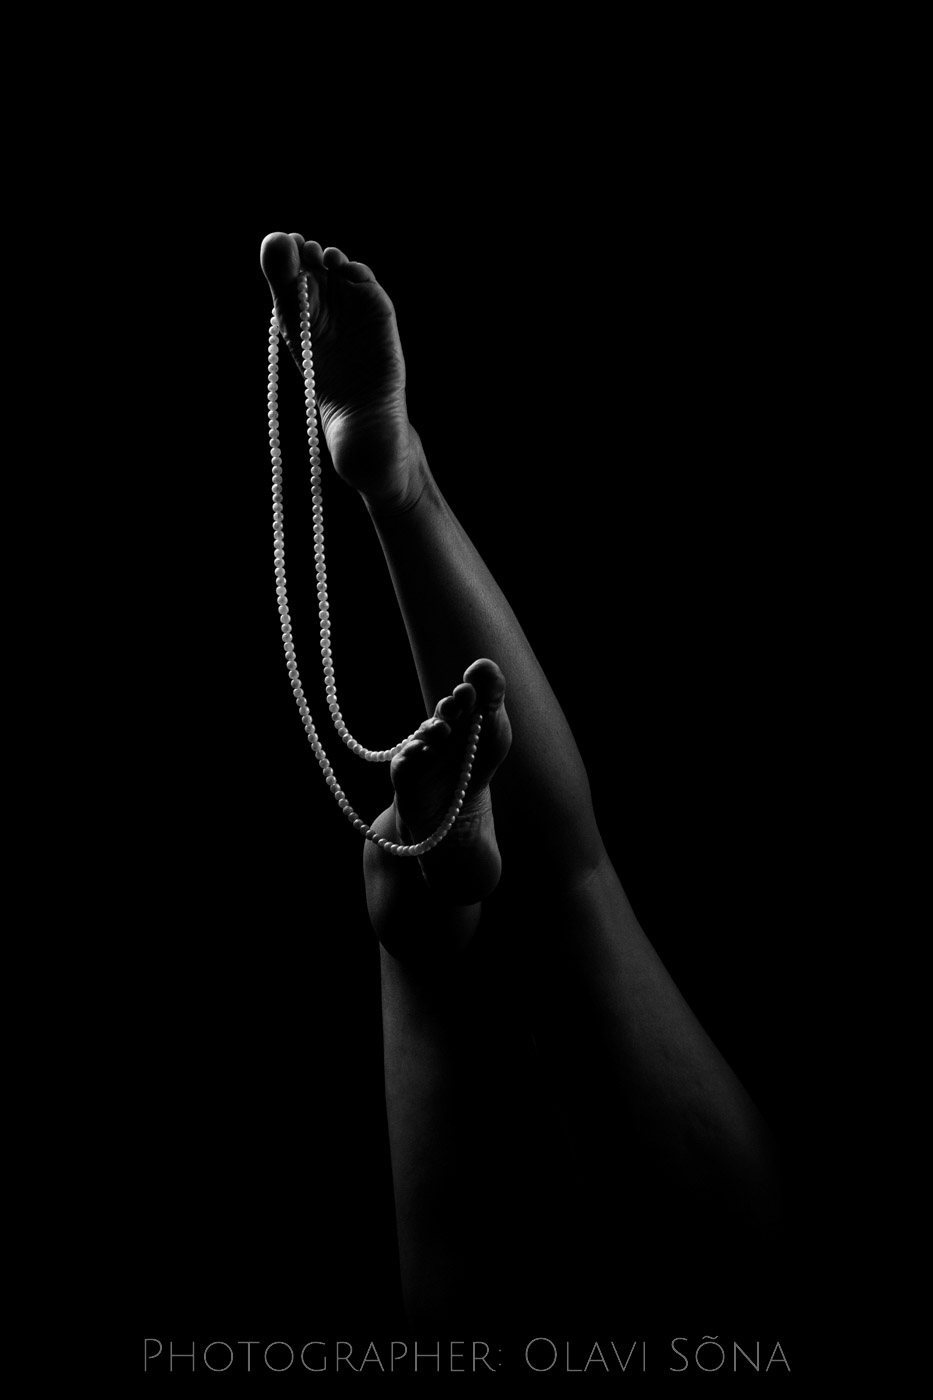 pearls on toes Nude Art Photography